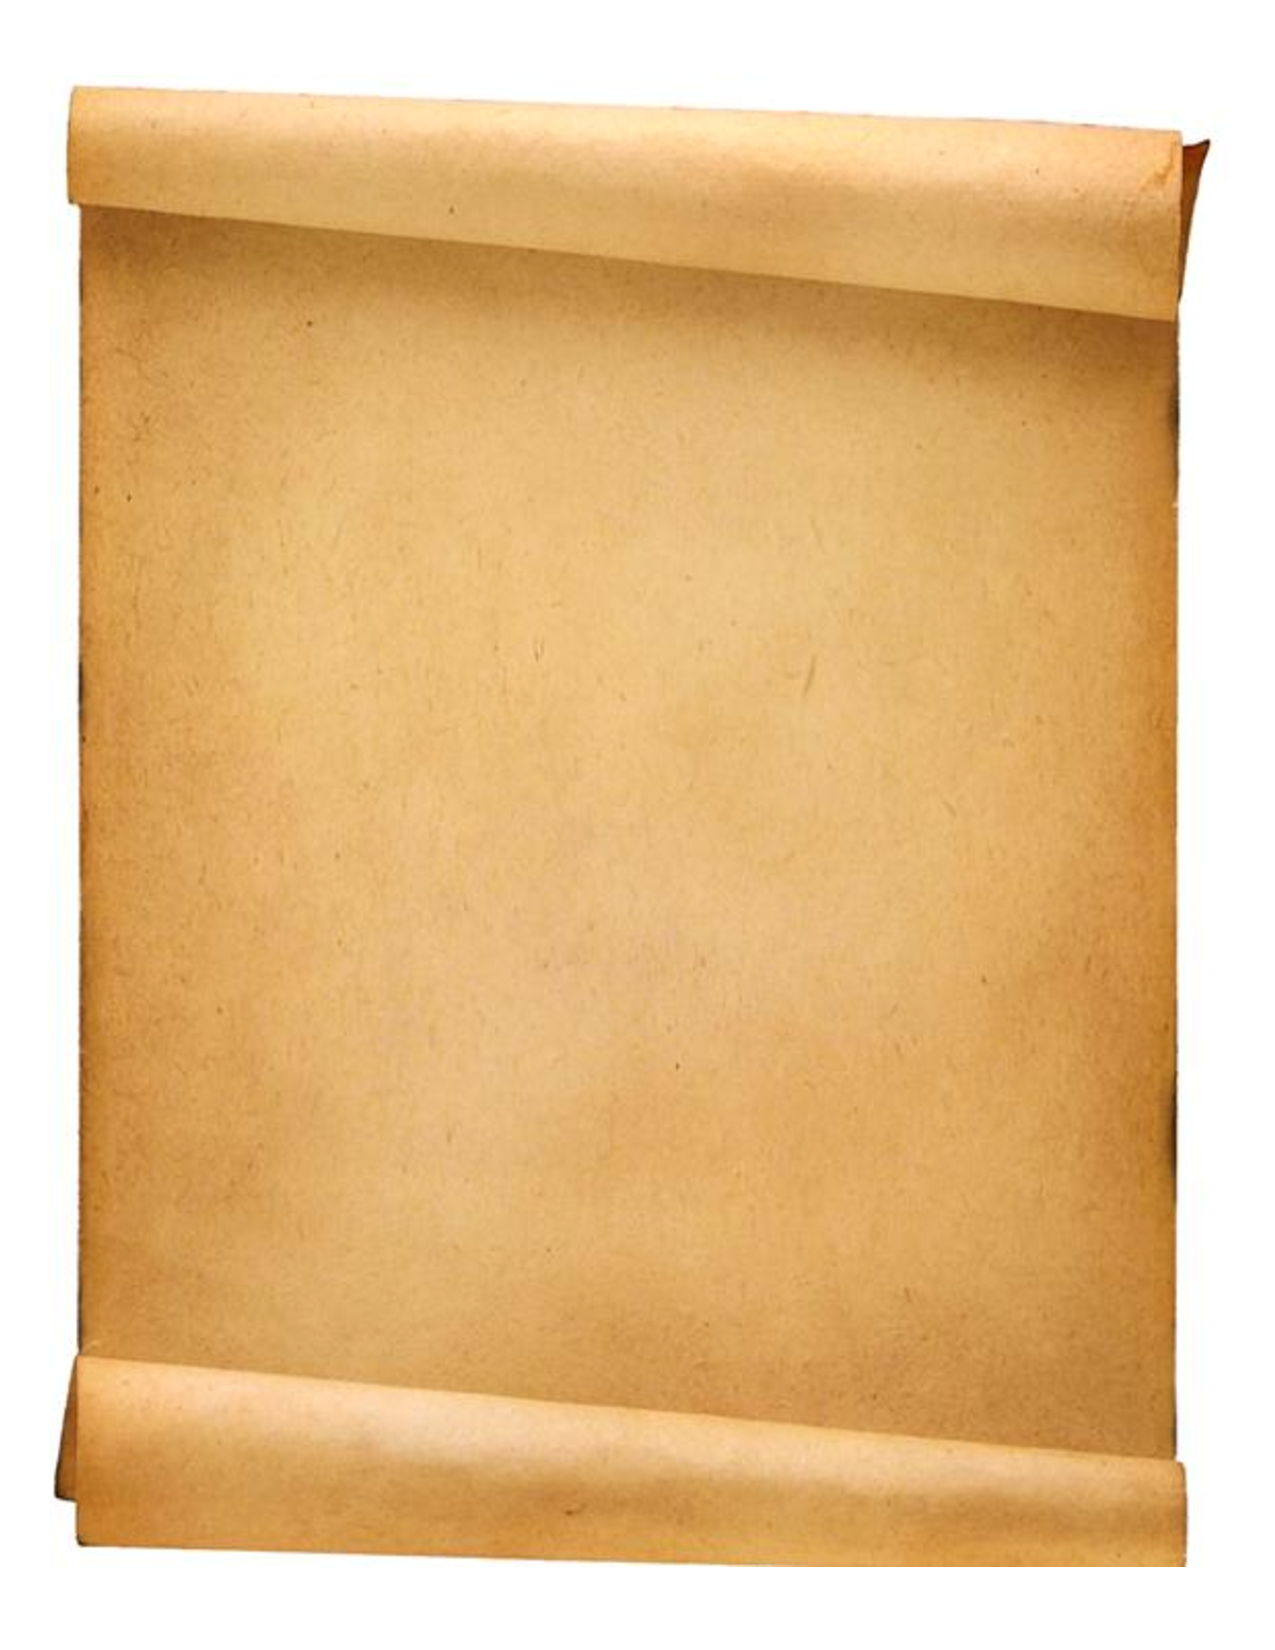 Best Photos of Paper Scroll Background - Blank Scroll Paper ...